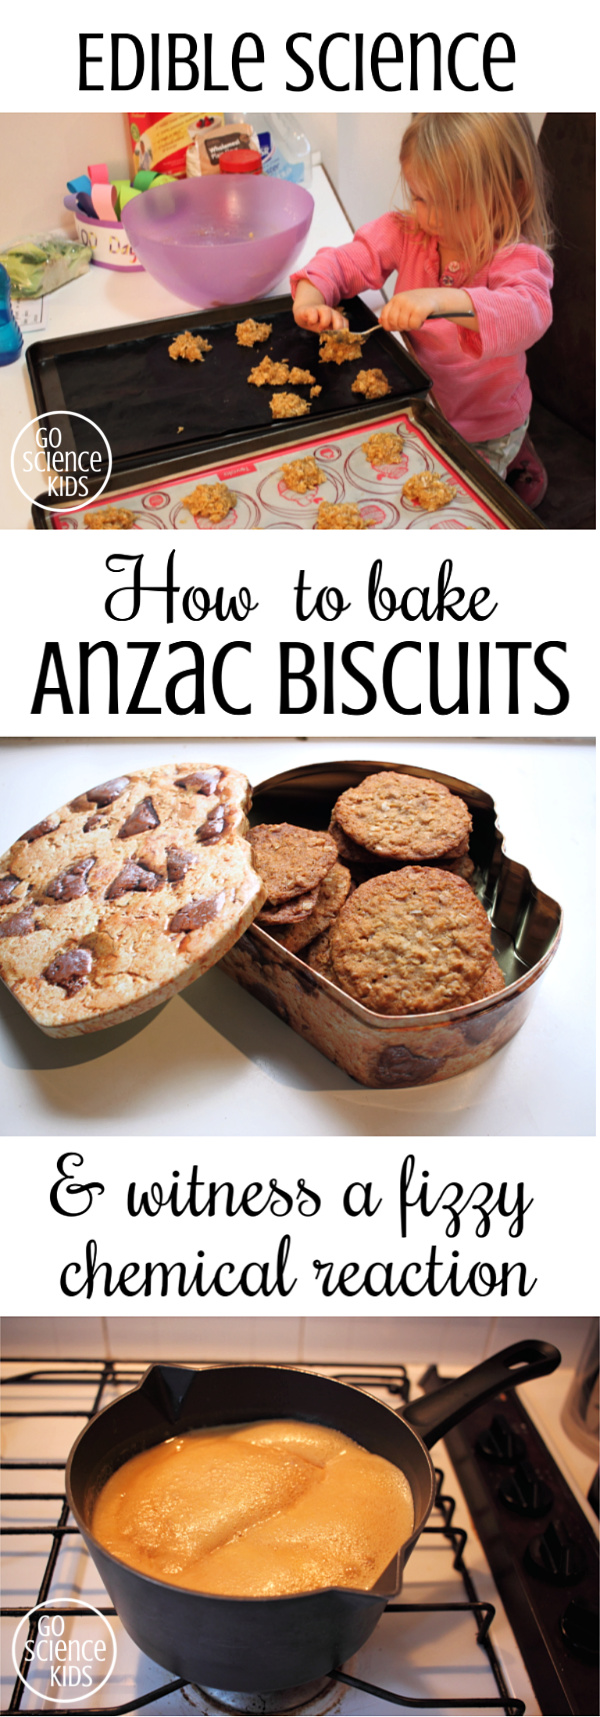 Edible Science for kids - bake Anzac biscuits and witness a fizzy acid-base chemical reaction